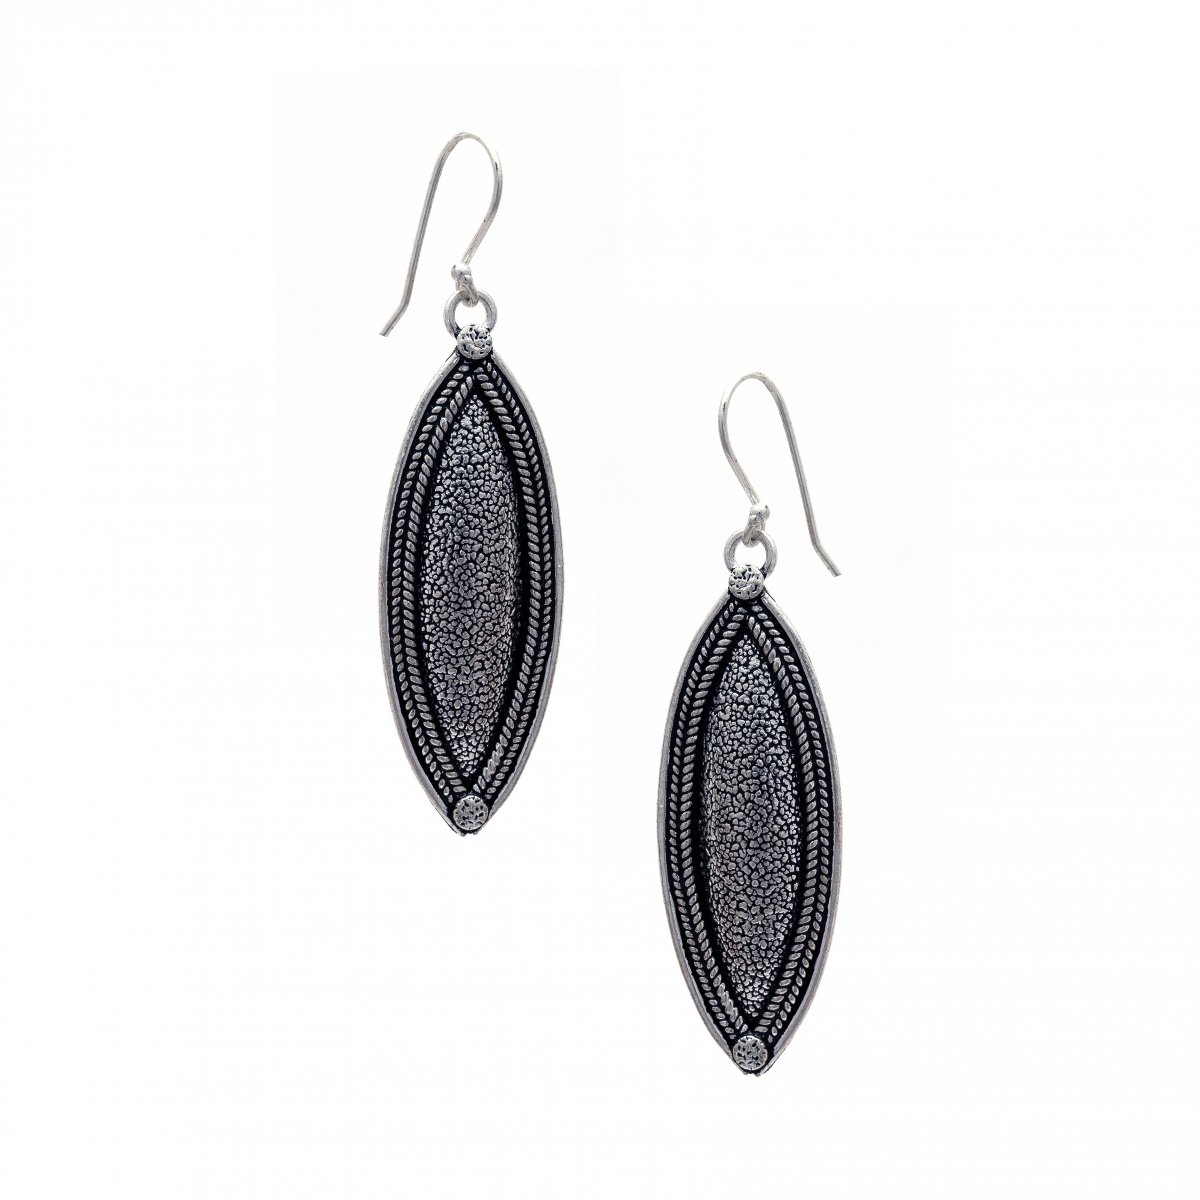 92.5 OXIDISED SILVER EARRINGS FOR WOMEN AND GIRLS